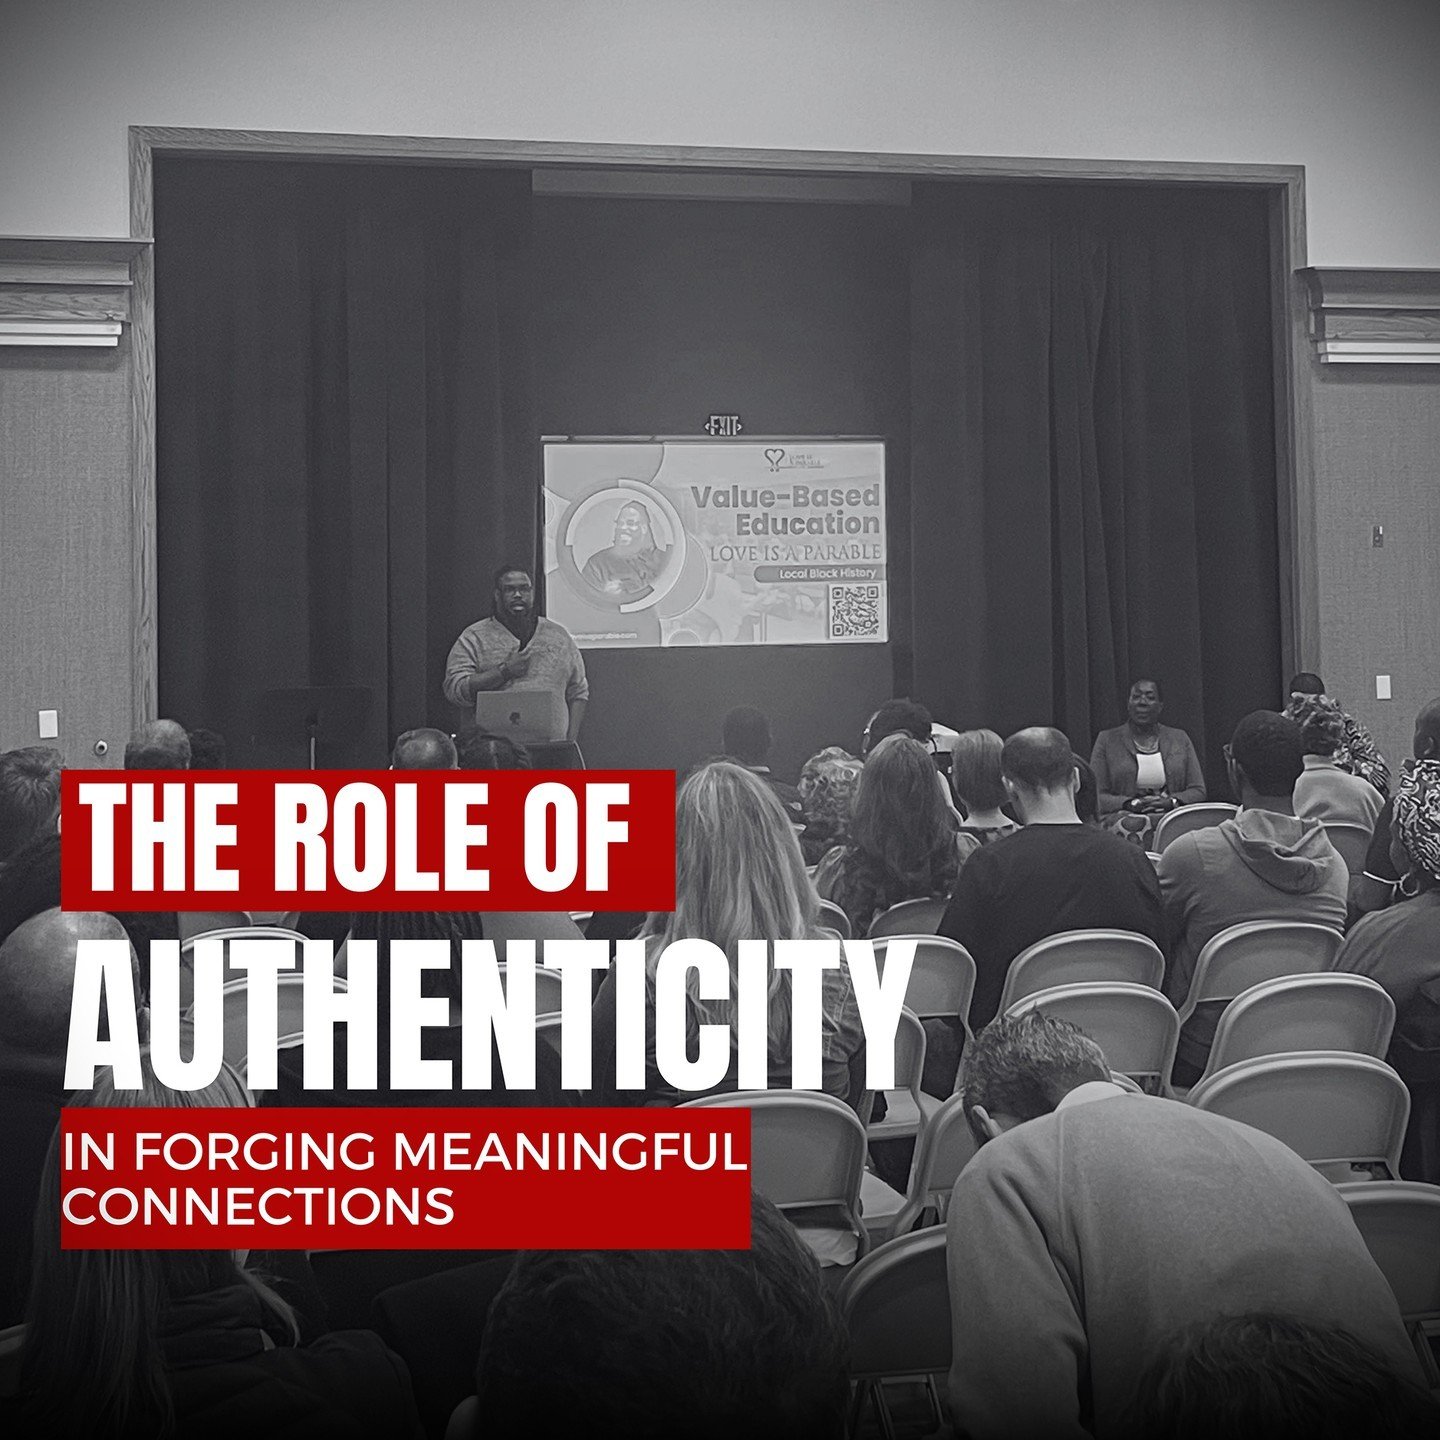 We are excited to share our latest piece, &quot;The Role of Authenticity in Forging Meaningful Connections.&quot; This article explores how staying true to ourselves can build stronger, more genuine relationships.

Check it out here: https://loveisap